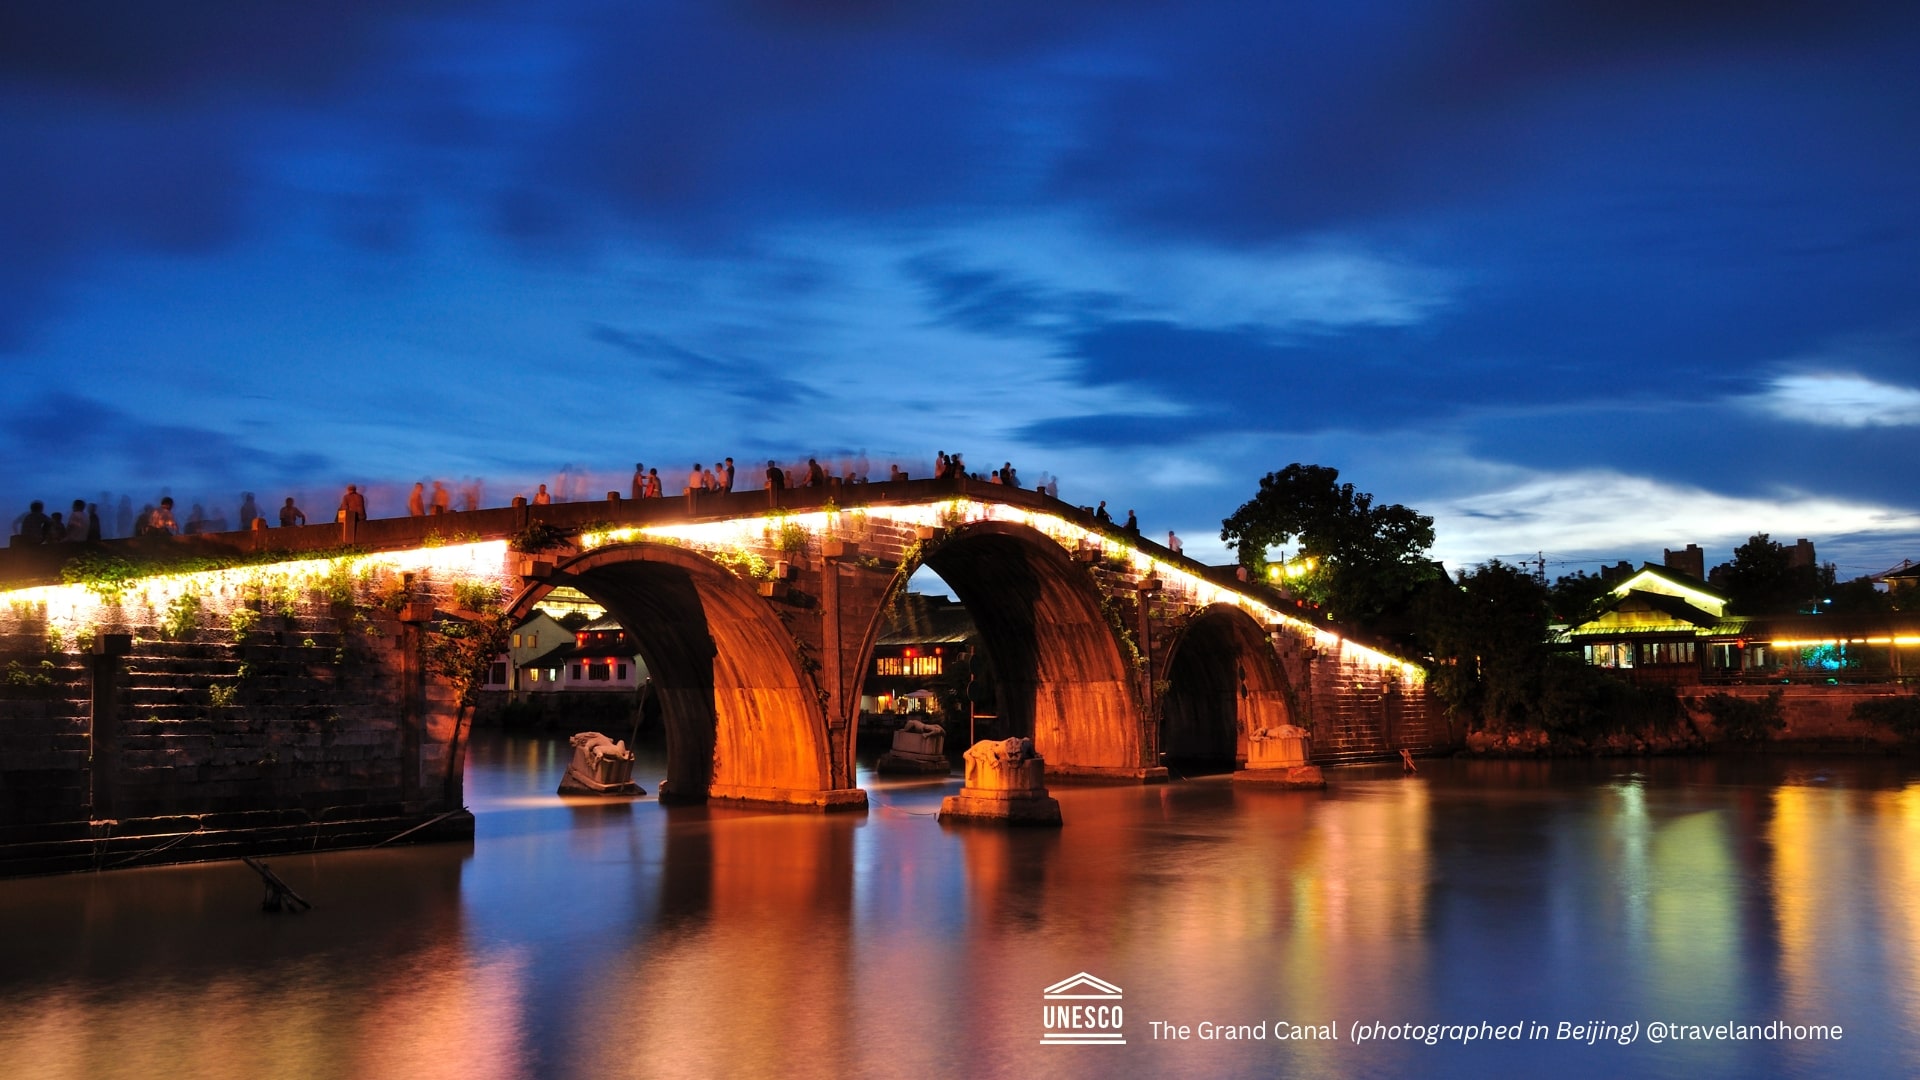 Grand Canal, Beijing, UNESCO World Heritage Sites in North China min